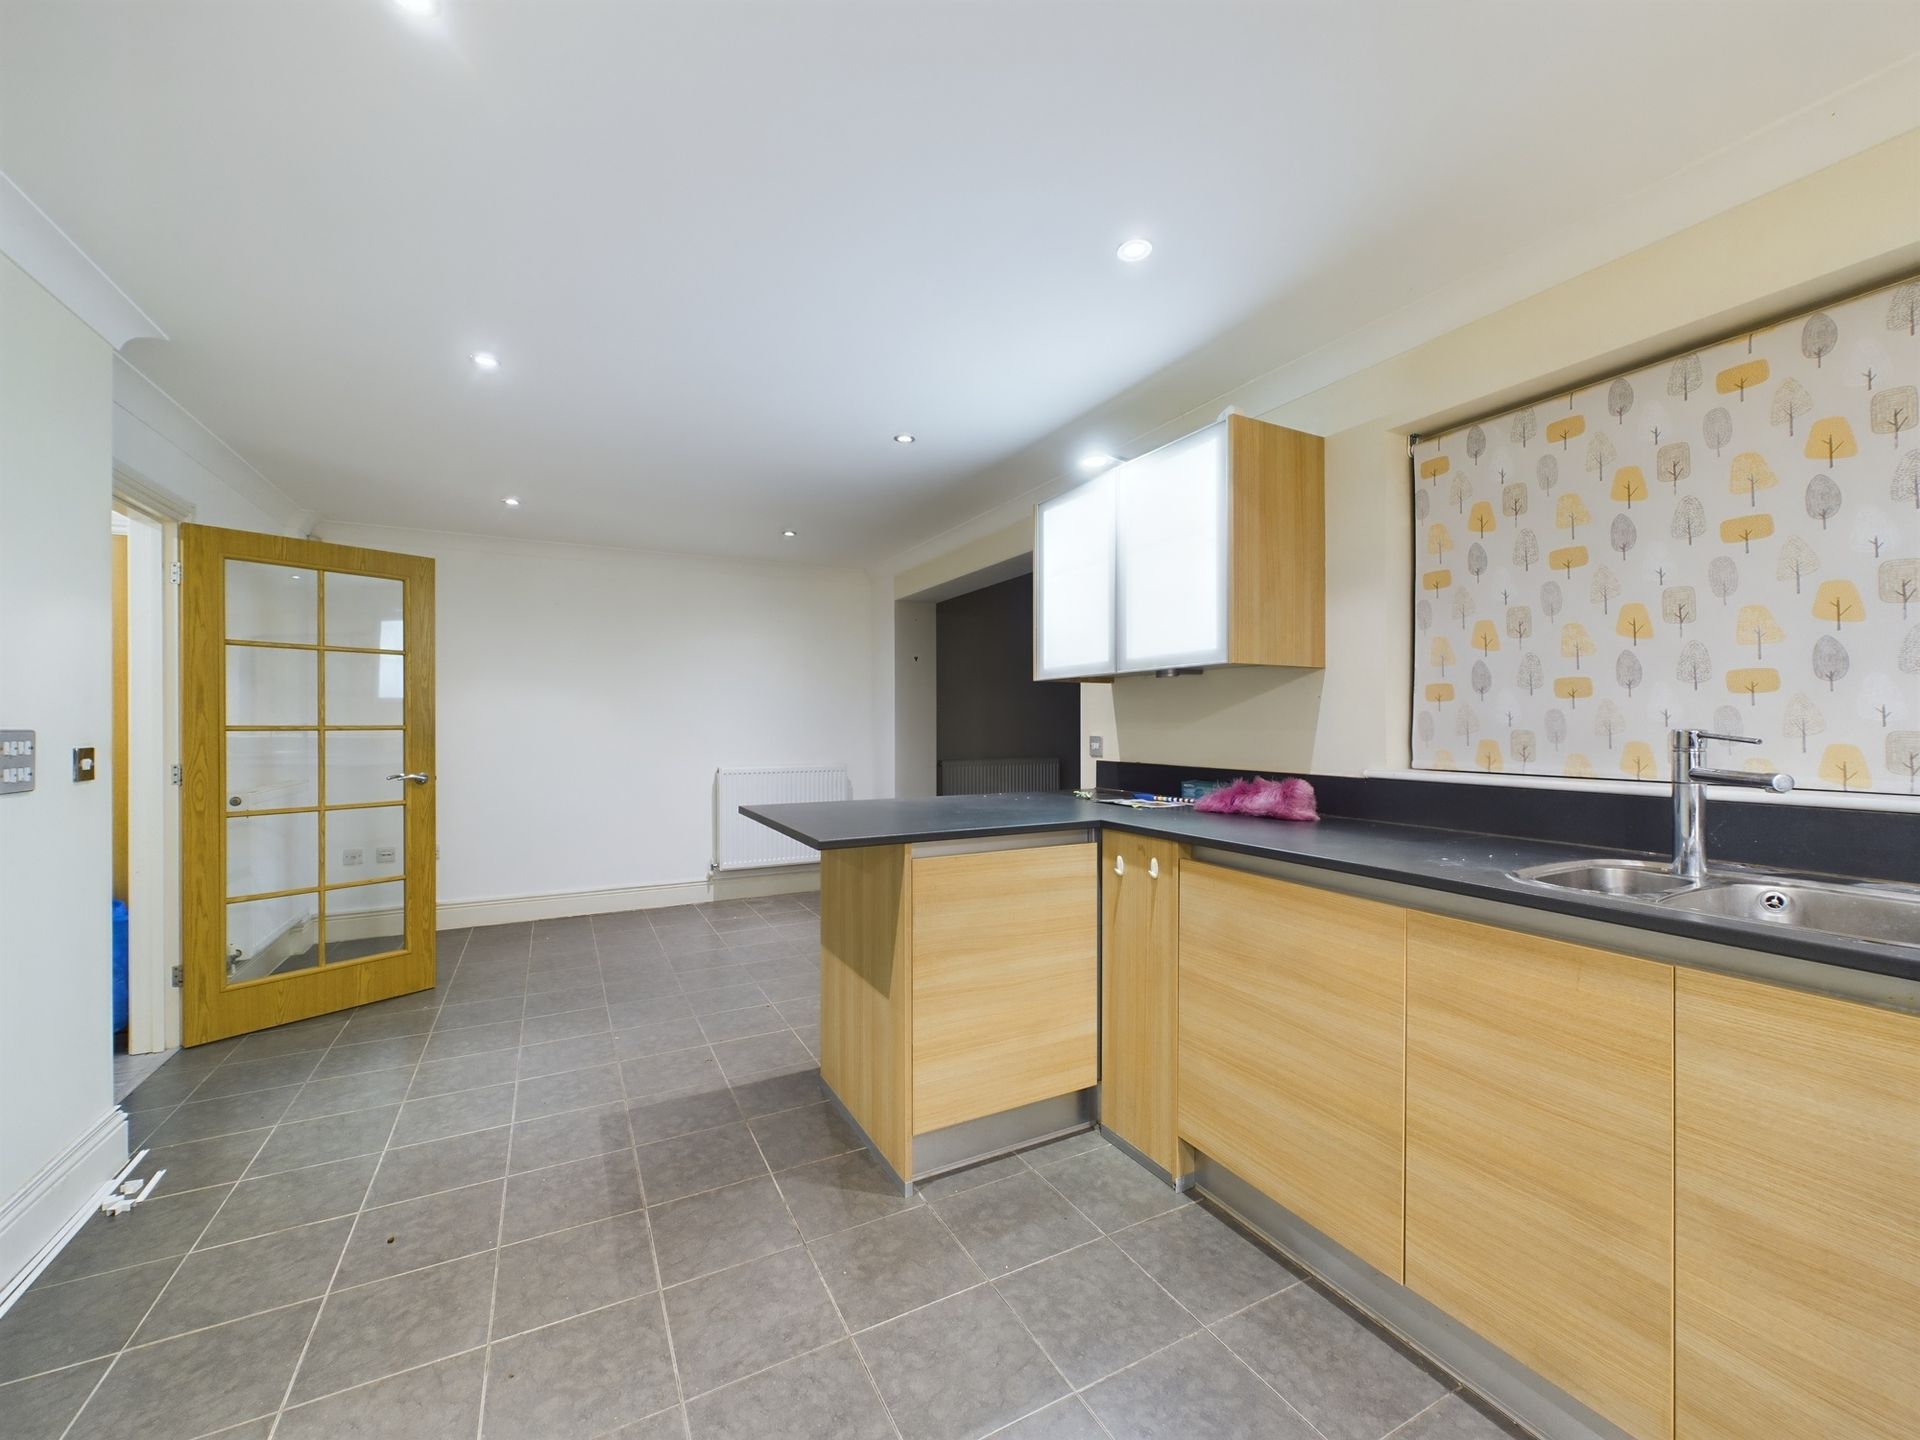 kitchen 3 bed house to rent reading